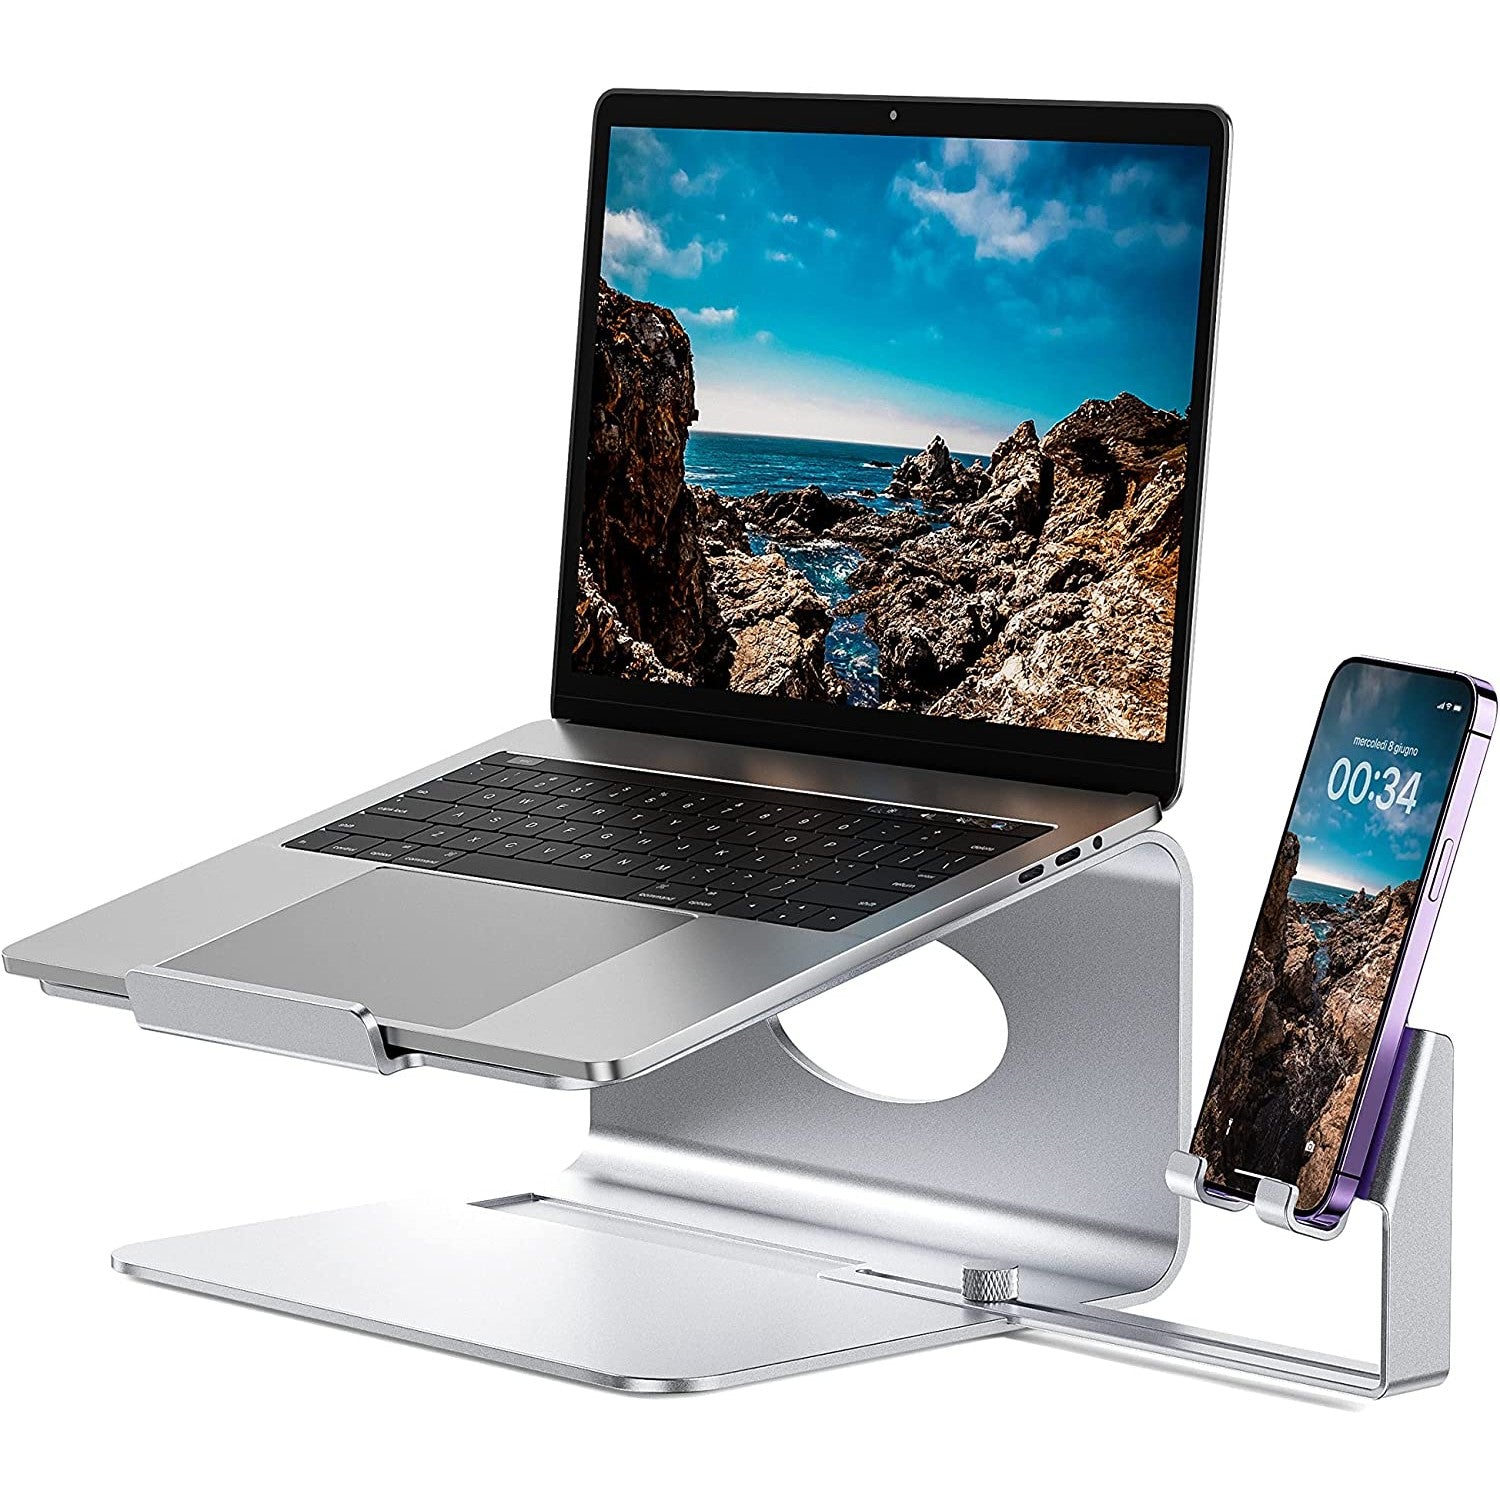 A metal laptop stand and phone holder which shows an open laptop on the stand and a cell phone in the holder.